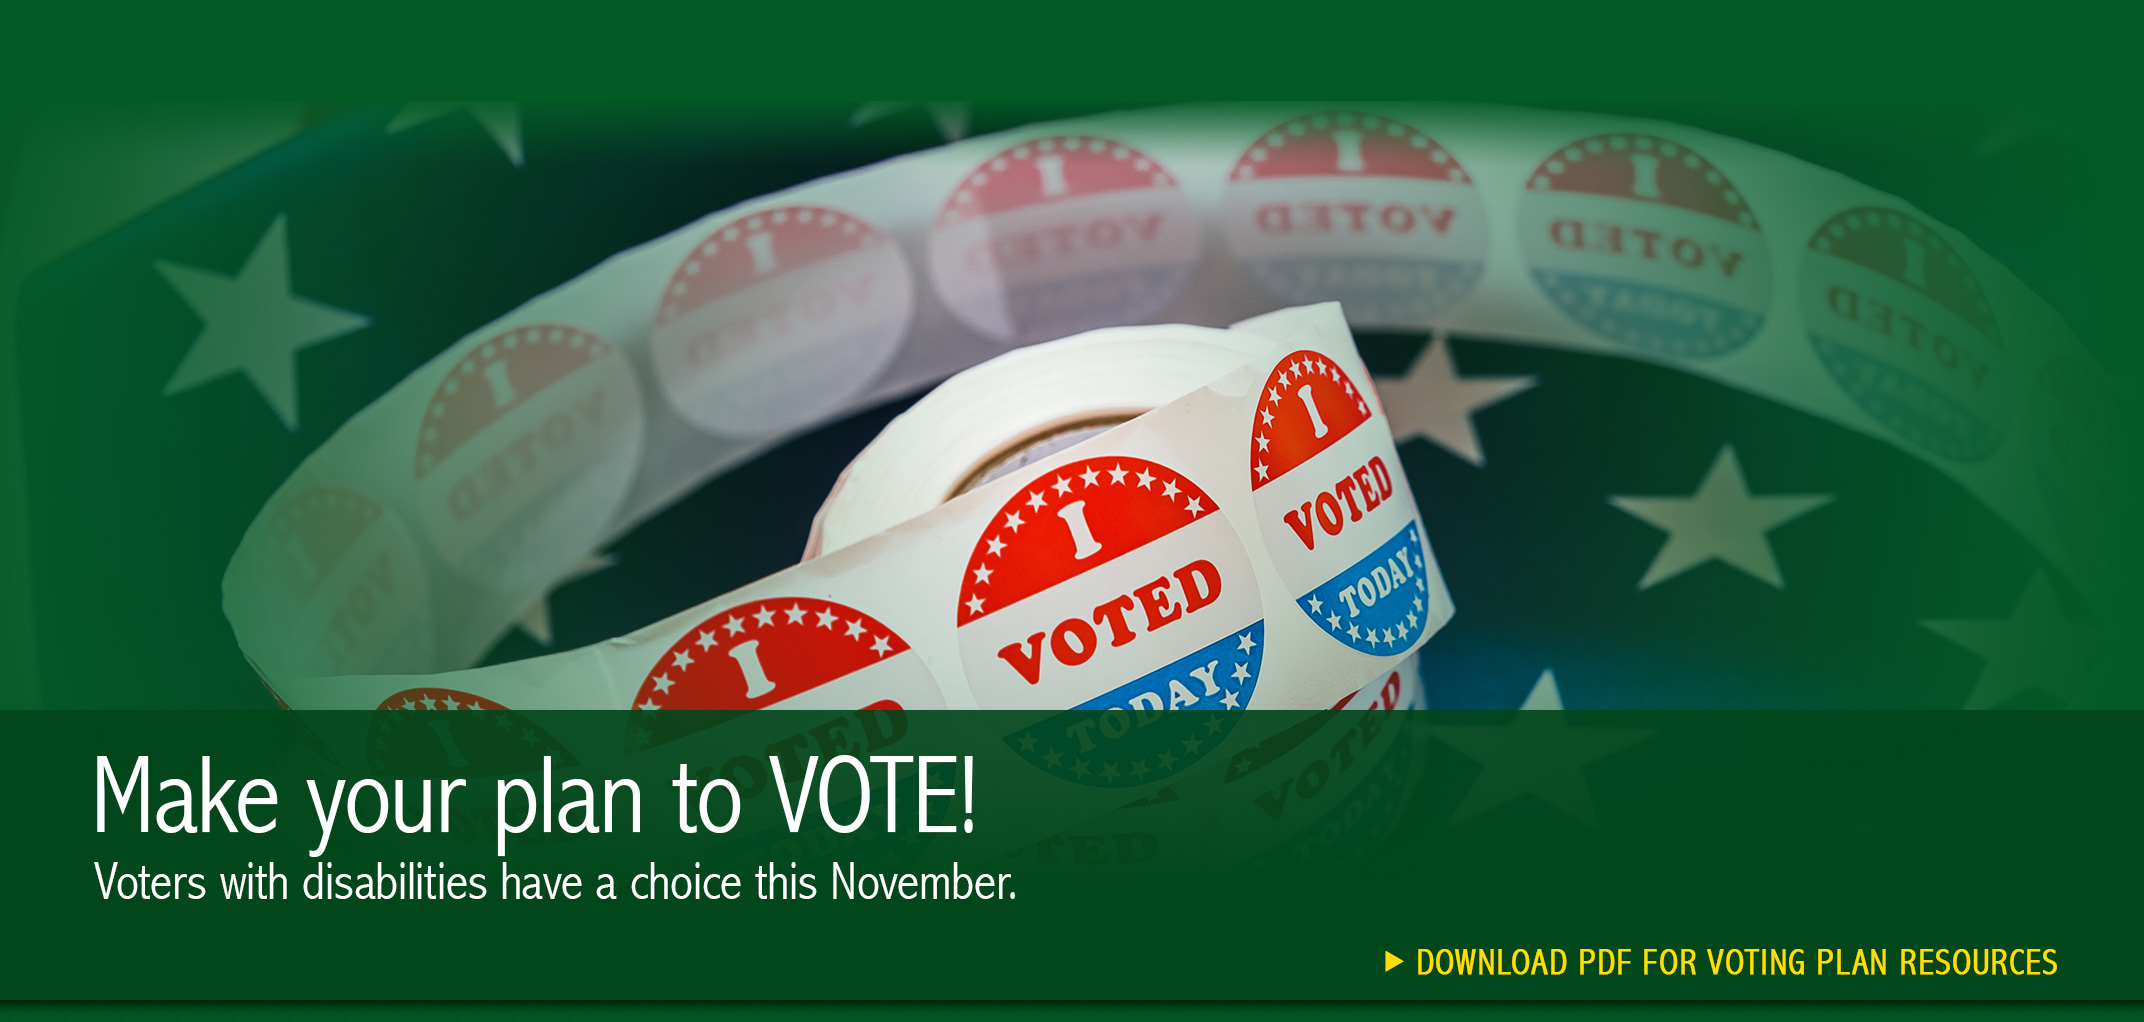 Make your plan to VOTE! Voters with disabilities have a choice this November. Click to download PDF for voting plan resources. Background image of an American flag with I voted stickers.